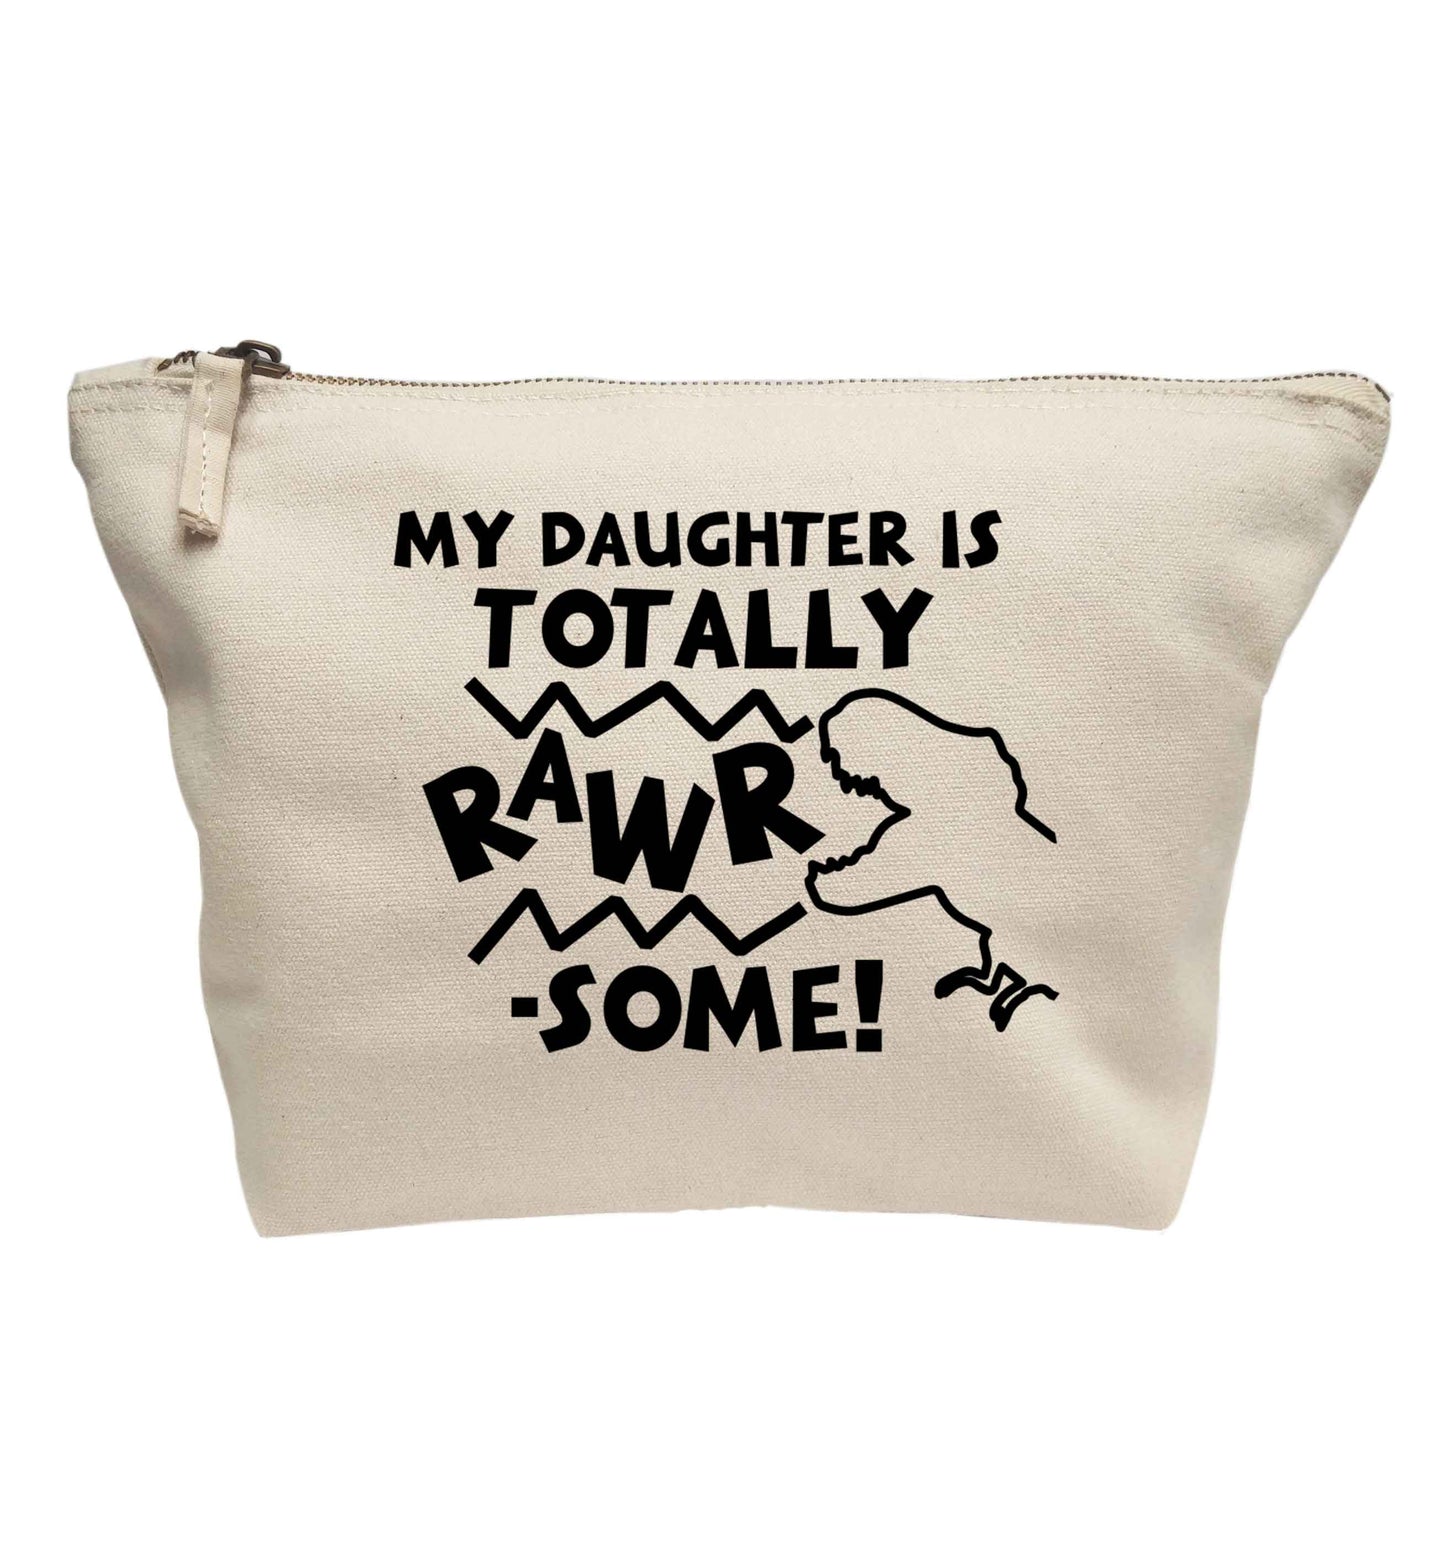 My daughter is totally rawrsome | Makeup / wash bag